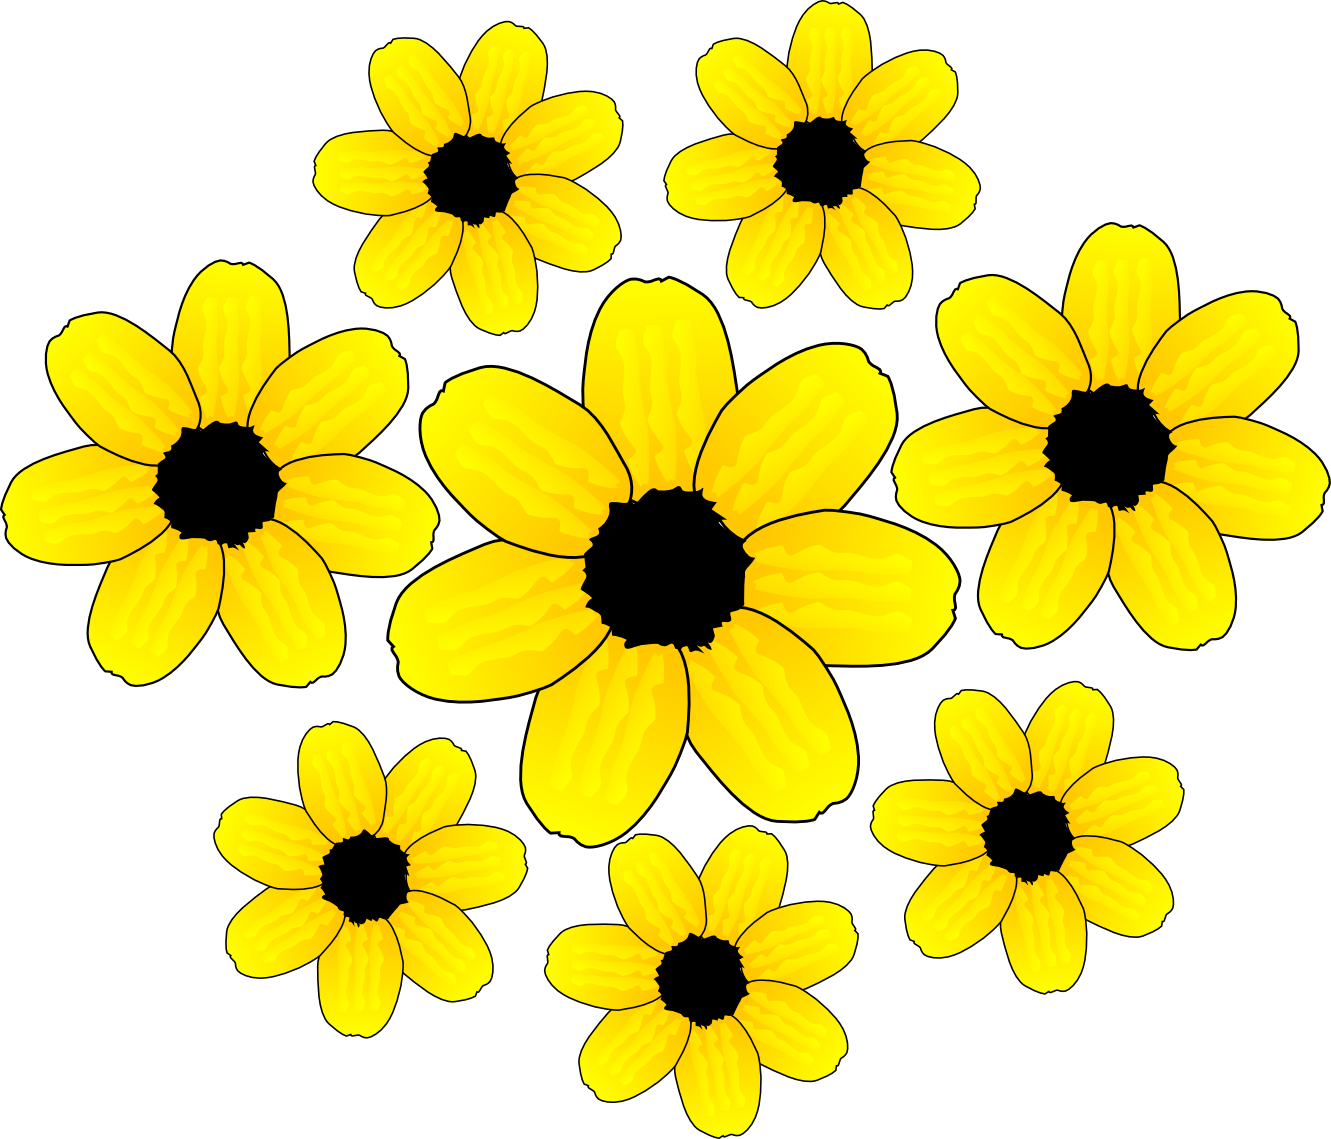 Yellow Flower clipart #17, Download drawings